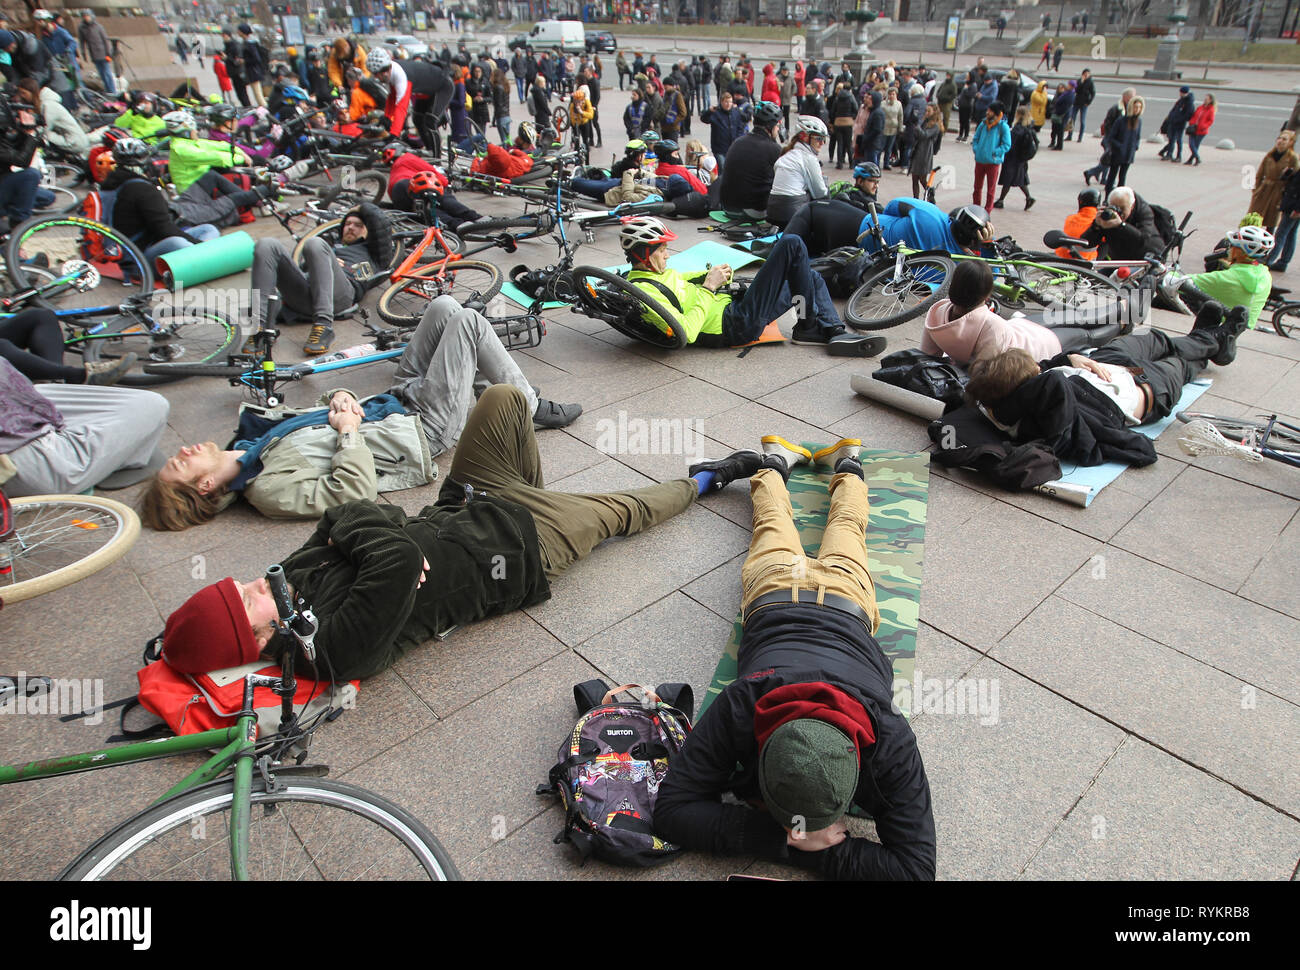 Cyclists seen laying on the ground with their bikes at the city hall during the protest. Cyclists demand for officials to announce tenders for bike routes and reduce the maximum allowed speed to 50 kilometers per hour for cars in the city. This ‘Die-In’ protest was connected to the death of an elderly cyclist, who was hit by a car at a bike lane in Kiev, according to activists. Stock Photo